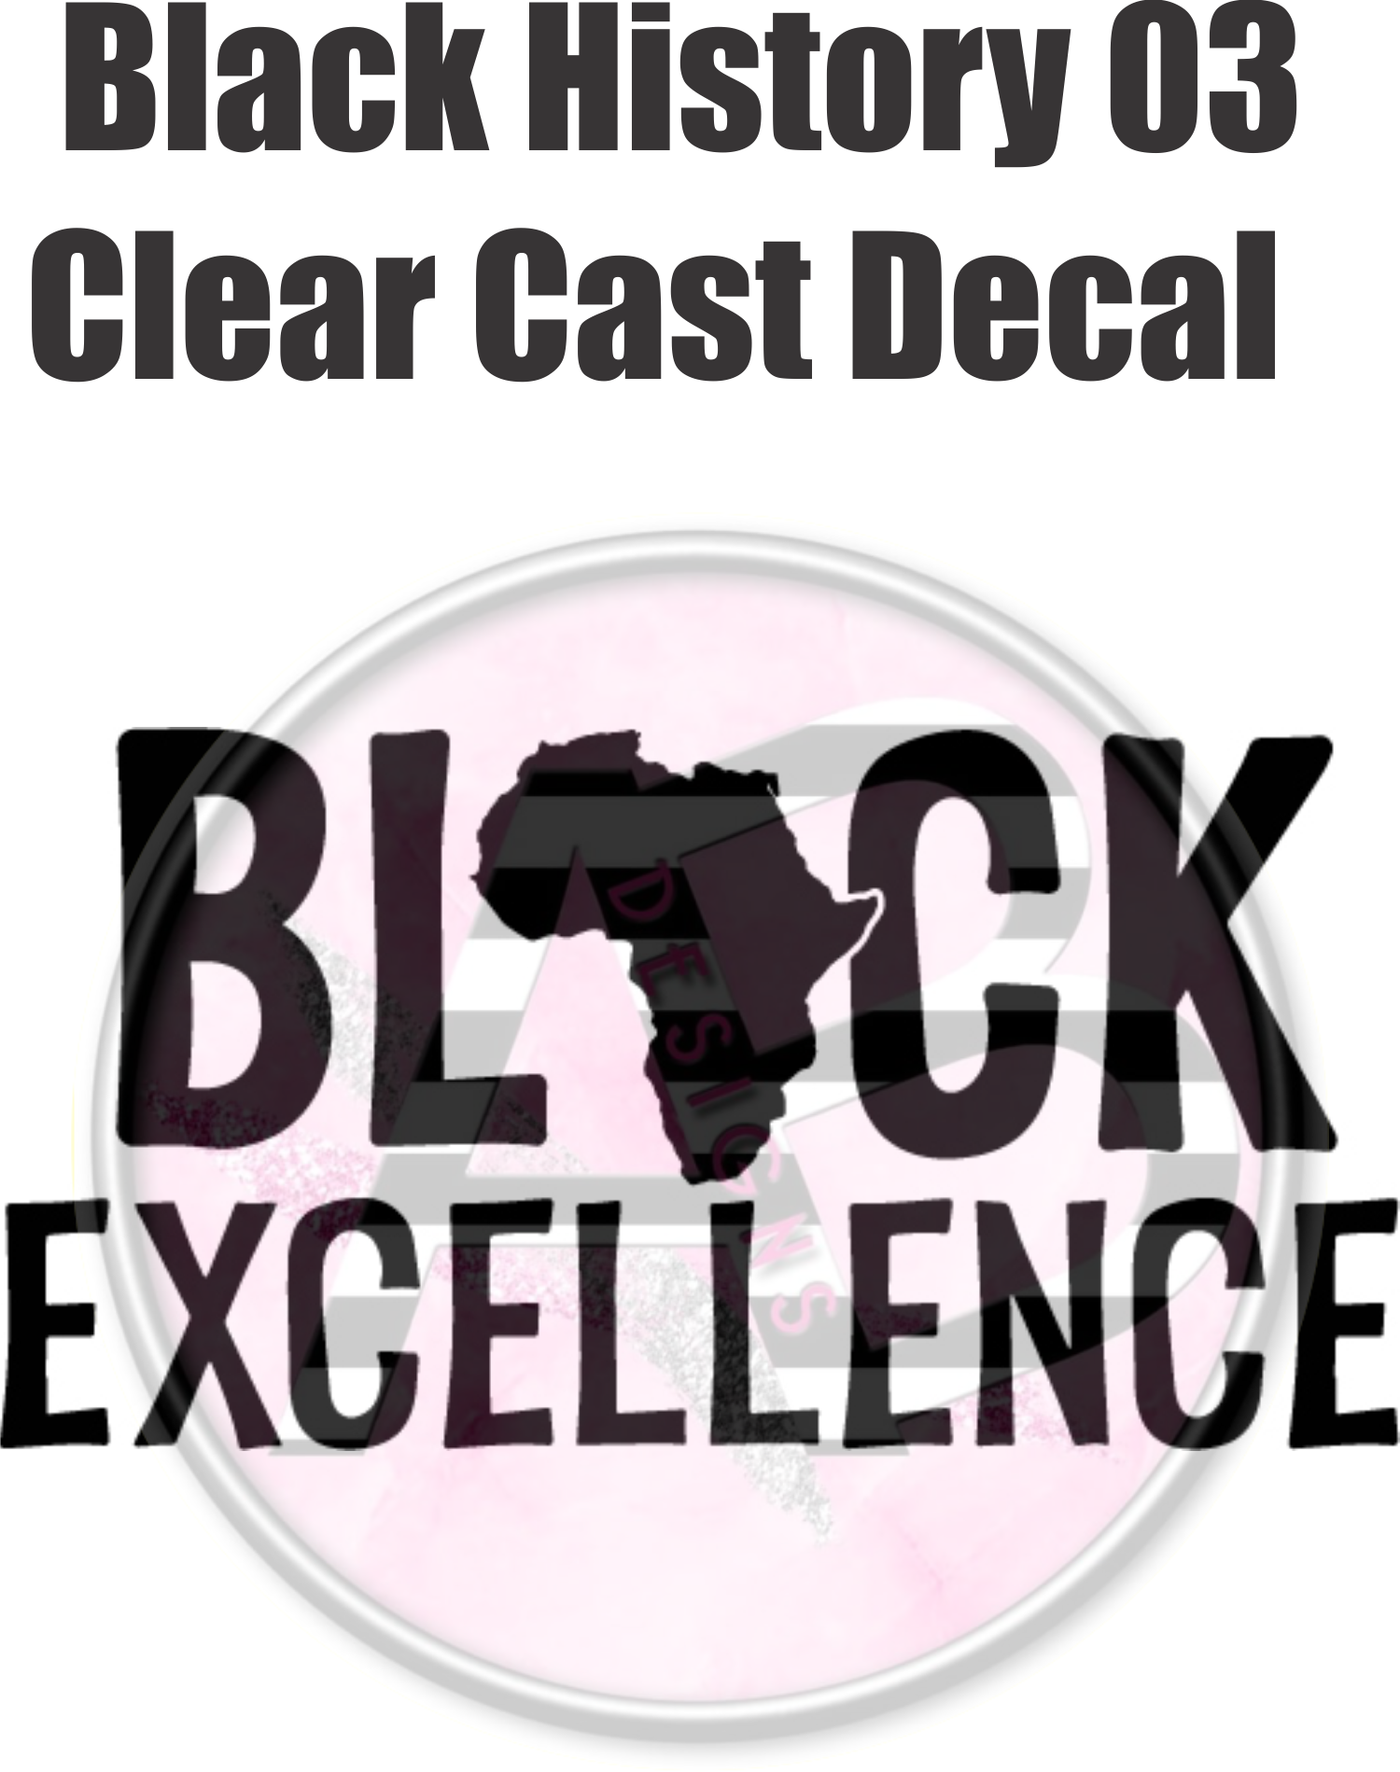 Black History 03 - Clear Cast Decal